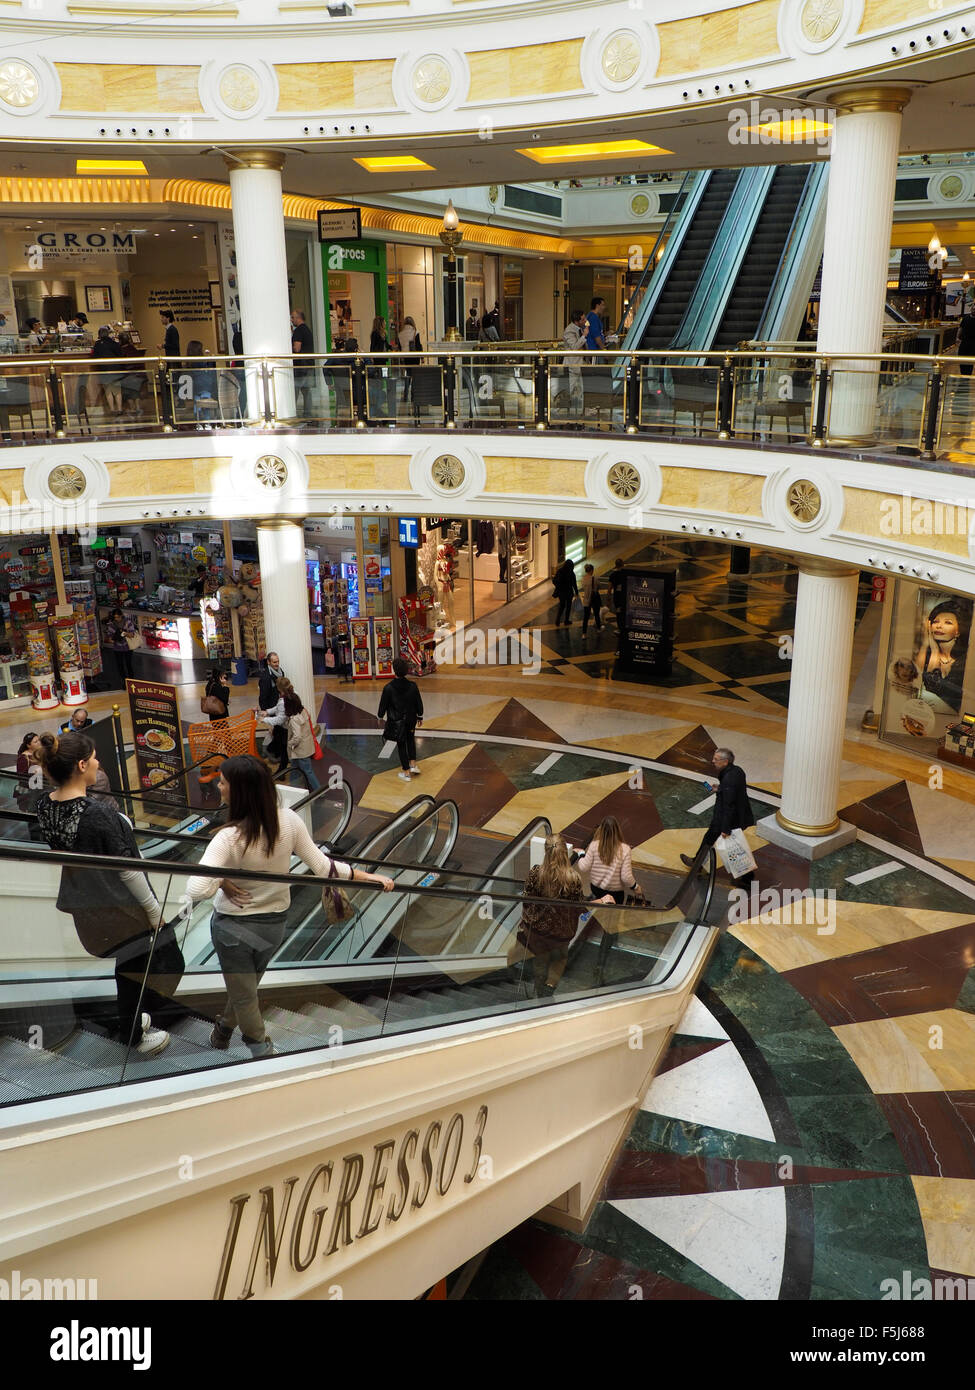 Euroma2 luxury shopping mall interior in the EUR district of Rome, Italy Stock Photo